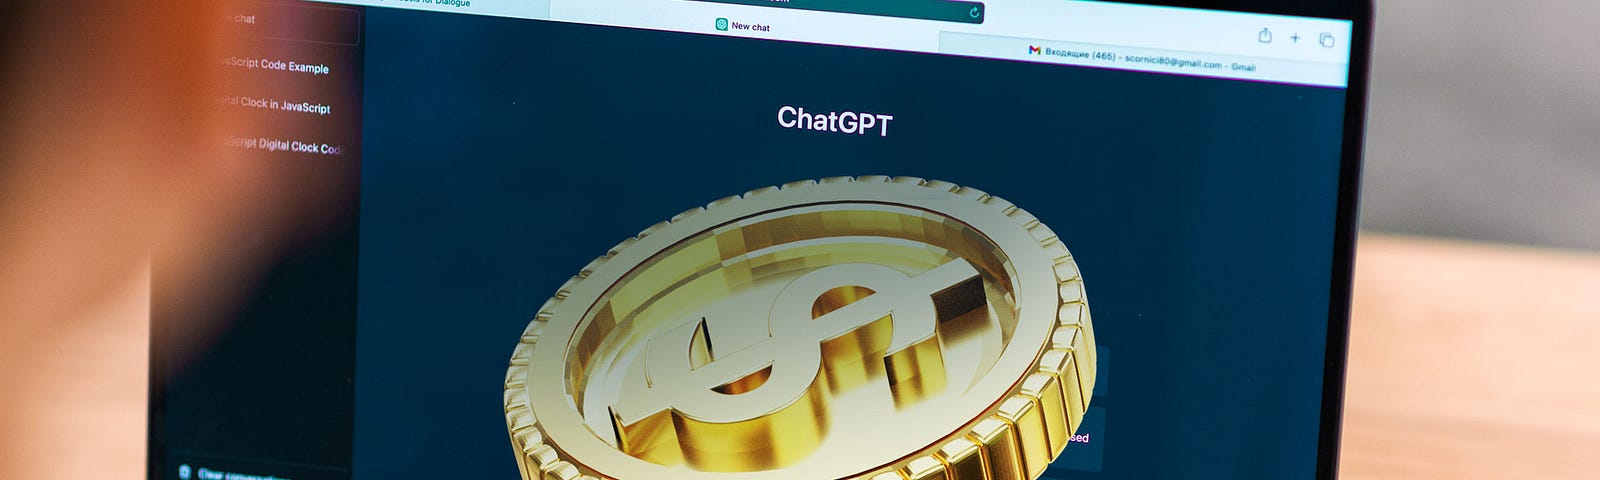 ChatGPT Store Earnings Exposed